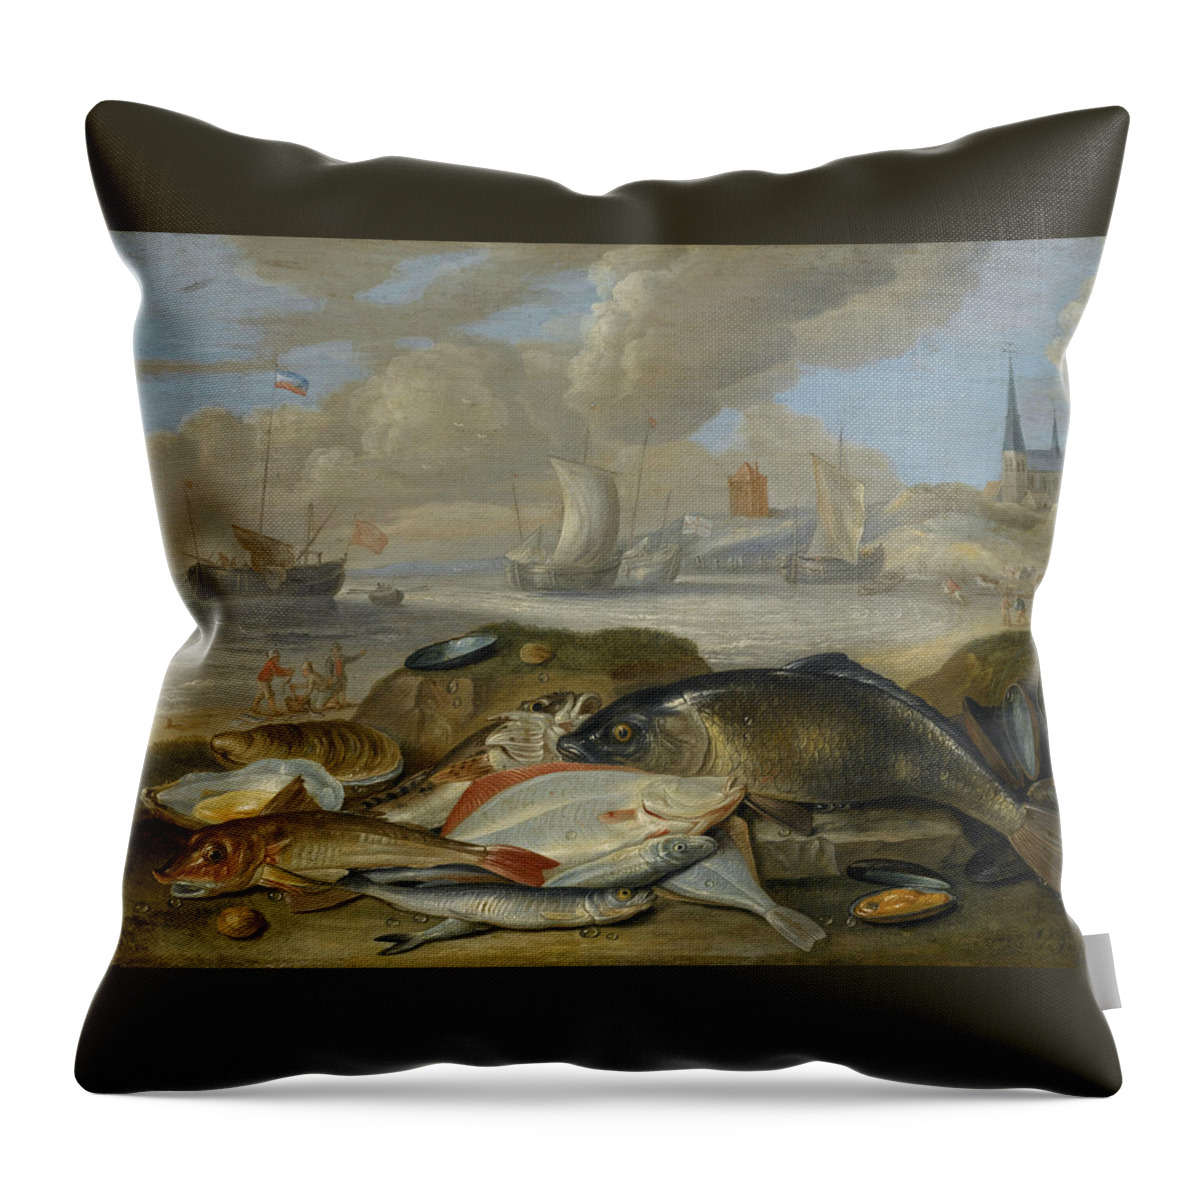 17th Century Art Throw Pillow featuring the painting Still Life of Fish in a Harbor Landscape, Possibly an Allegory of the Element of Water by Jan van Kessel the Elder